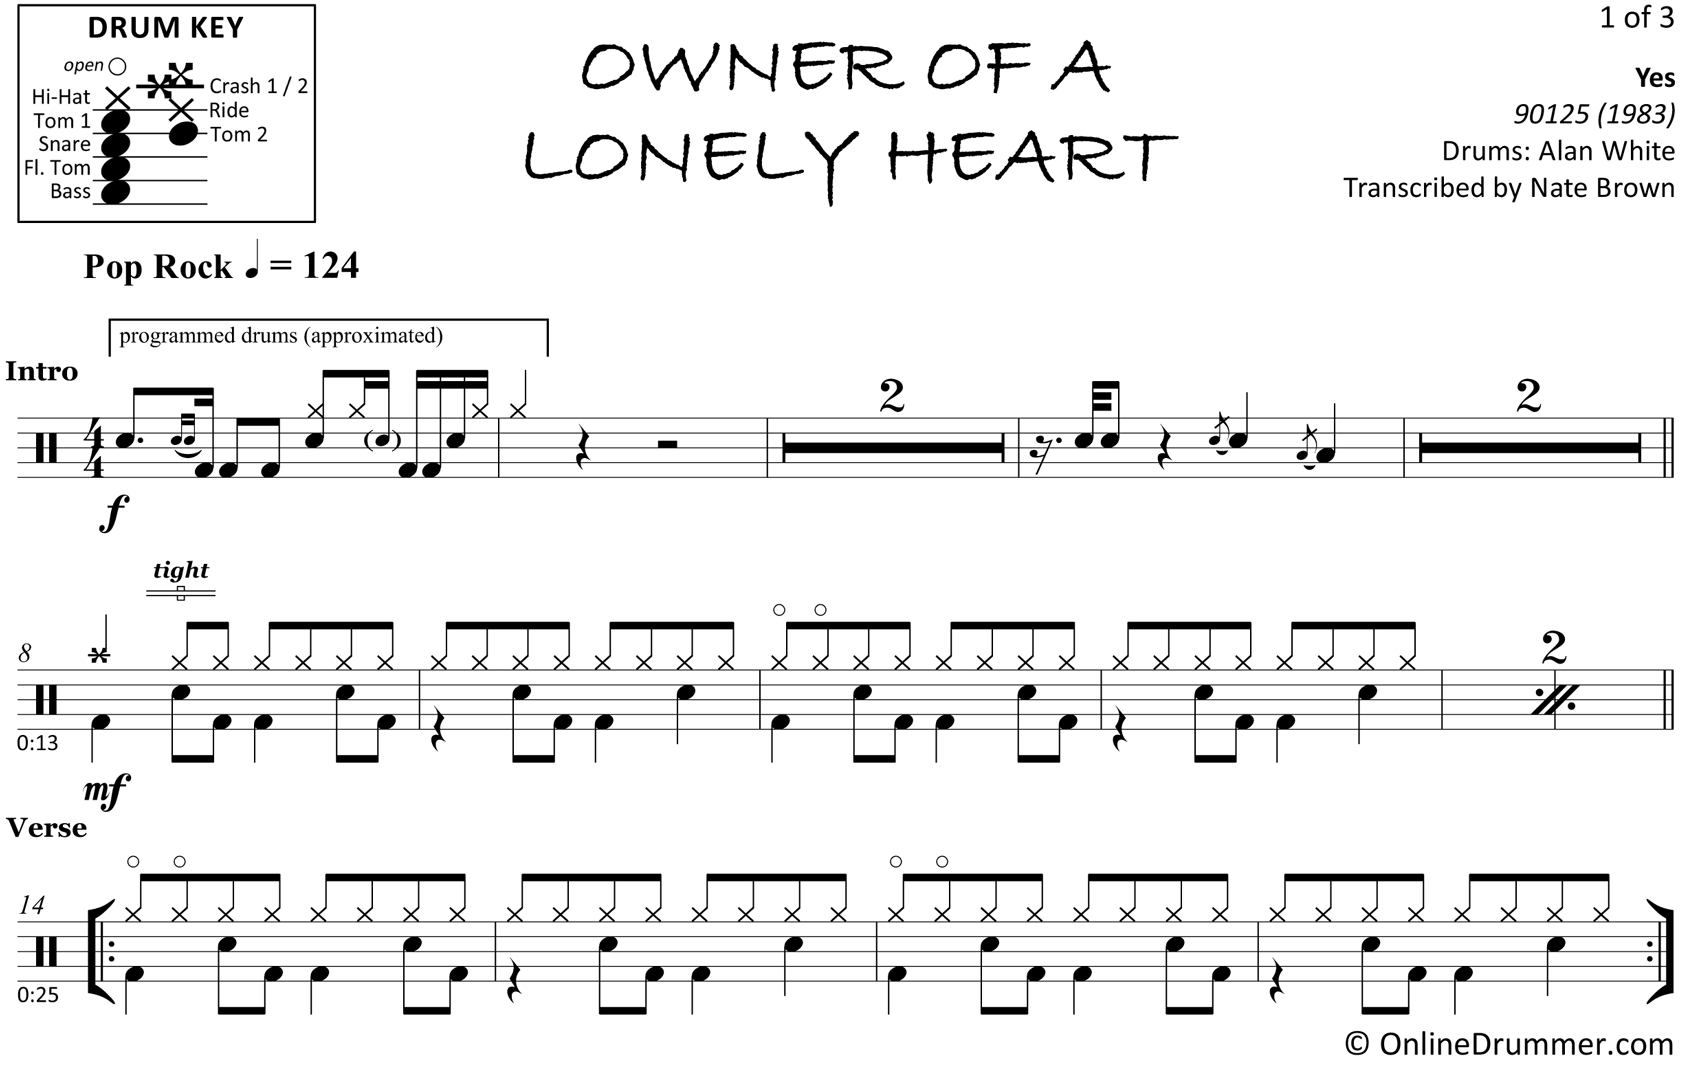 Owner of a Lonely Heart - Yes - Drum Sheet Music